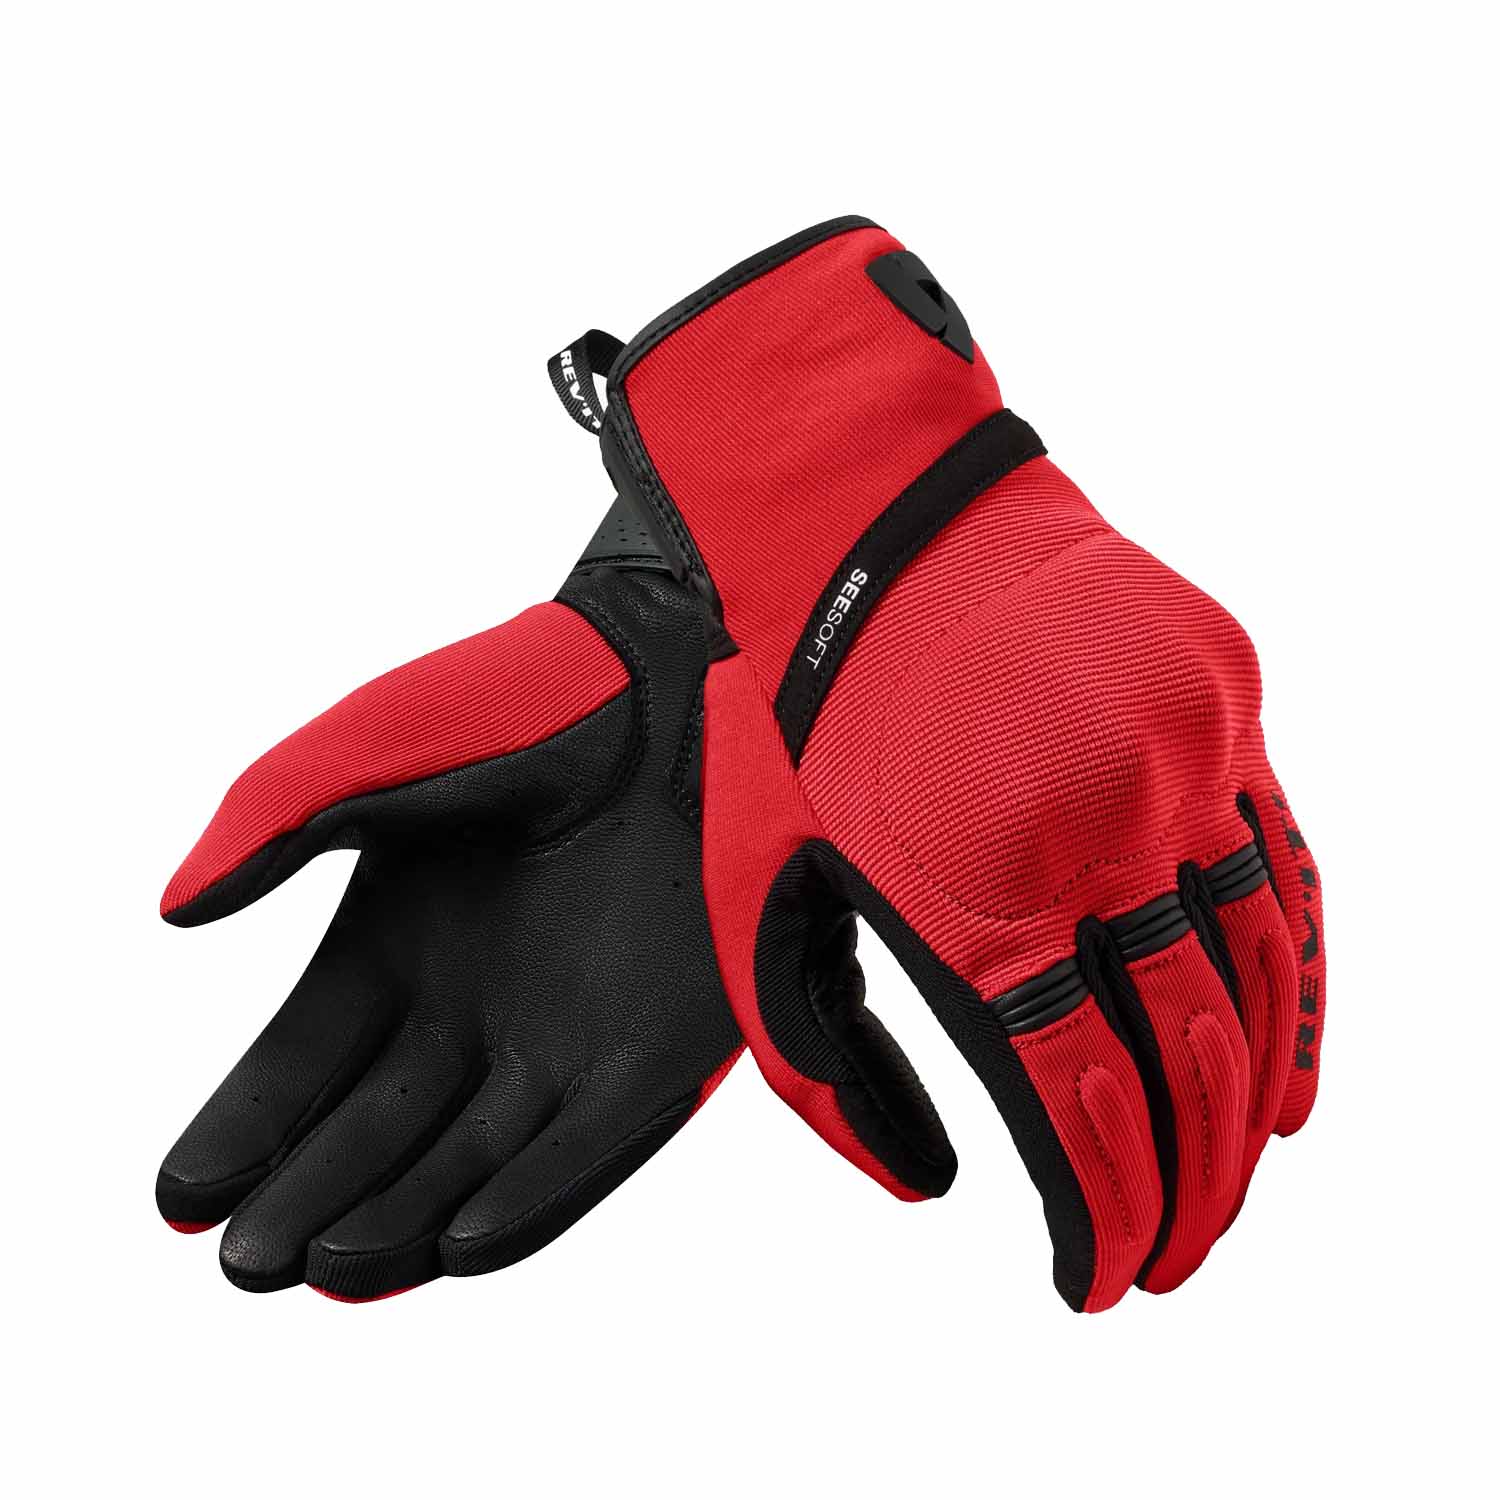 Image of EU REV'IT! Mosca 2 Gloves Red Black Taille 3XL